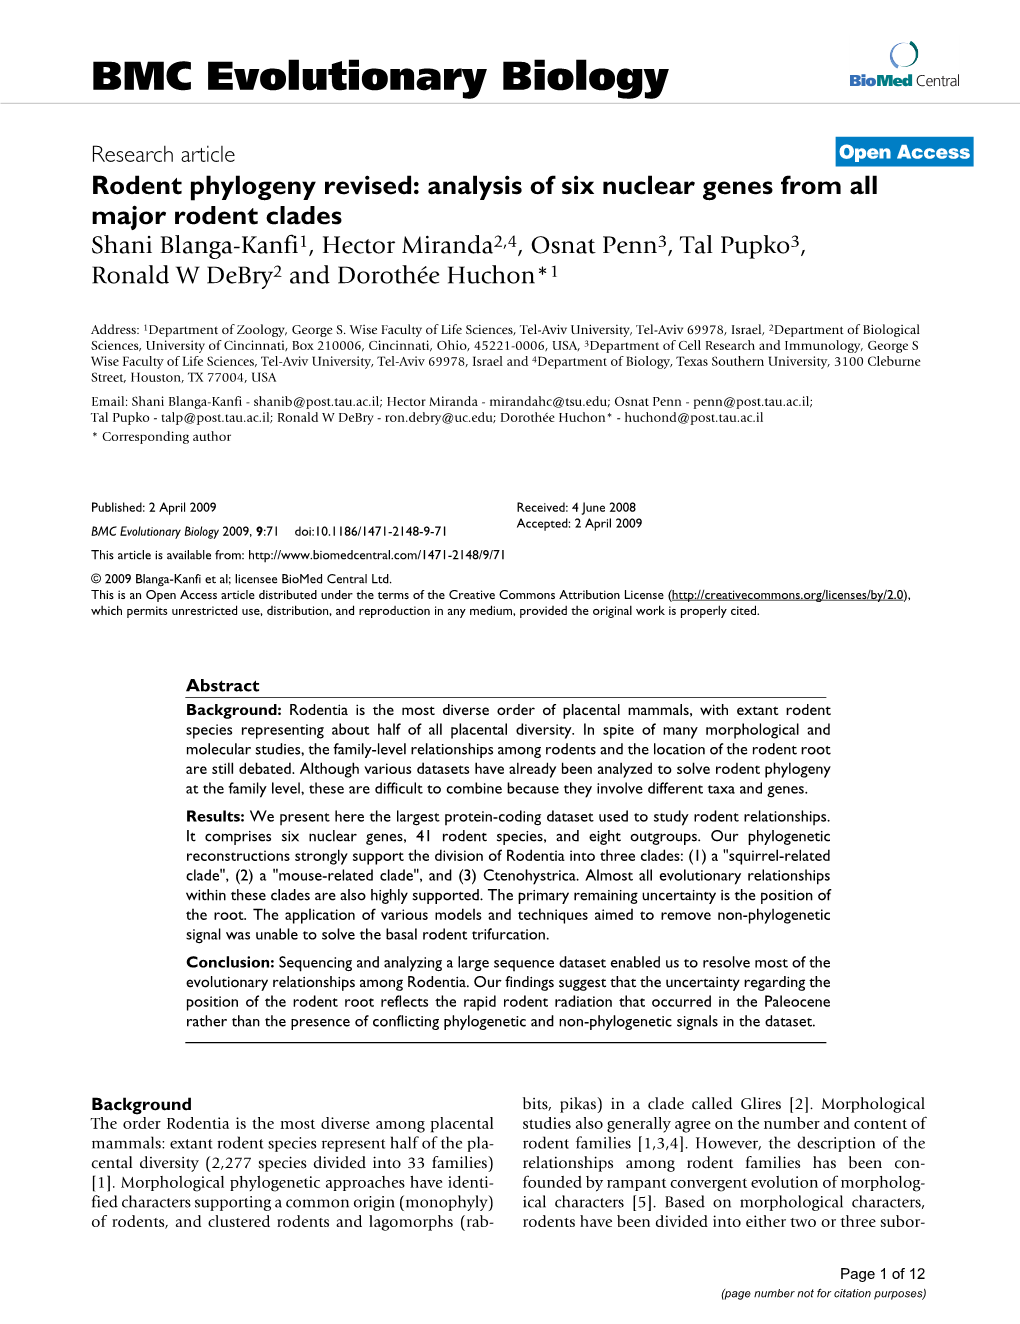 Rodent Phylogeny Revised: Analysis of Six Nuclear Genes from All Major